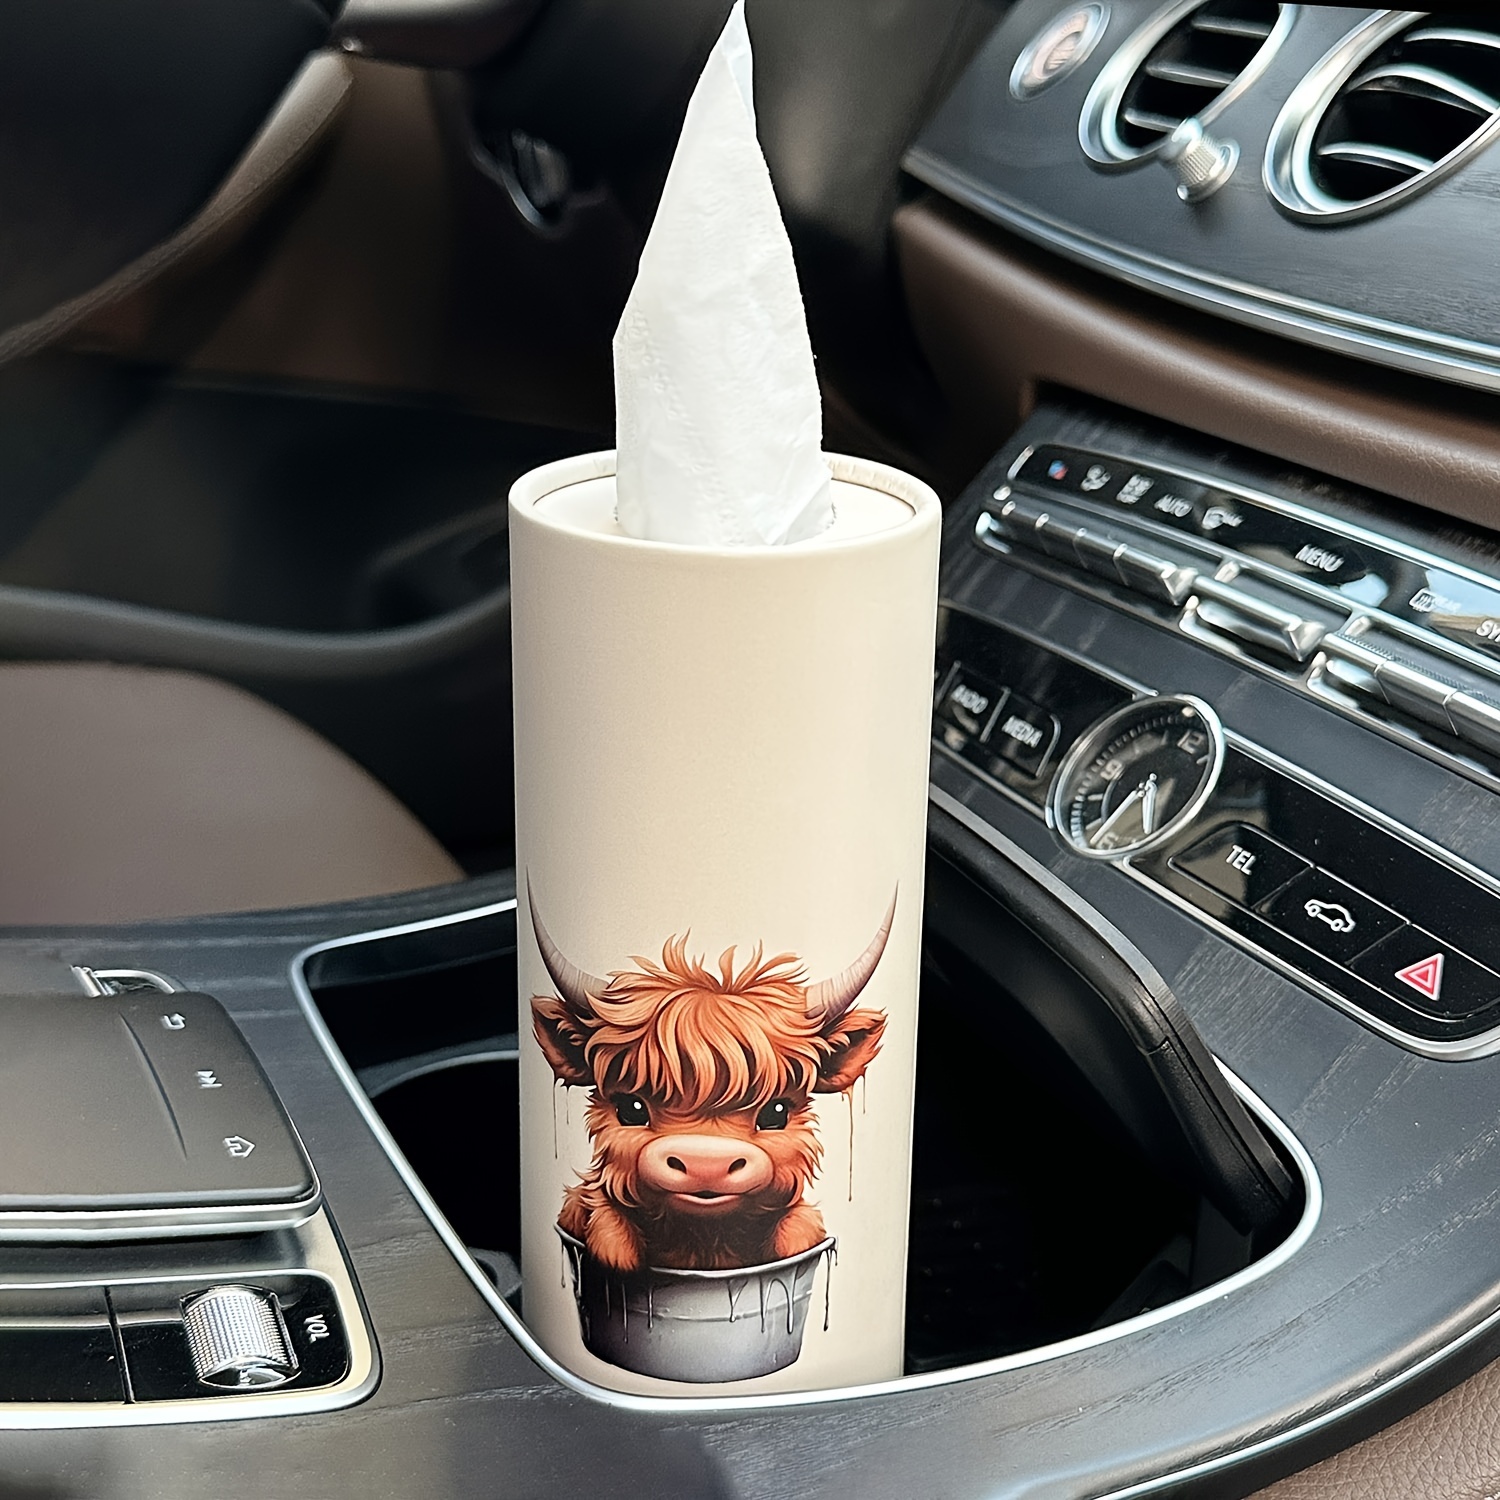 

1pc Highland Cow Car Tissues Box With Facial Tissues - Travel Tissue Cylinder Tubes For Car Cup Holder, Round Tissue Case For Home Dining Table